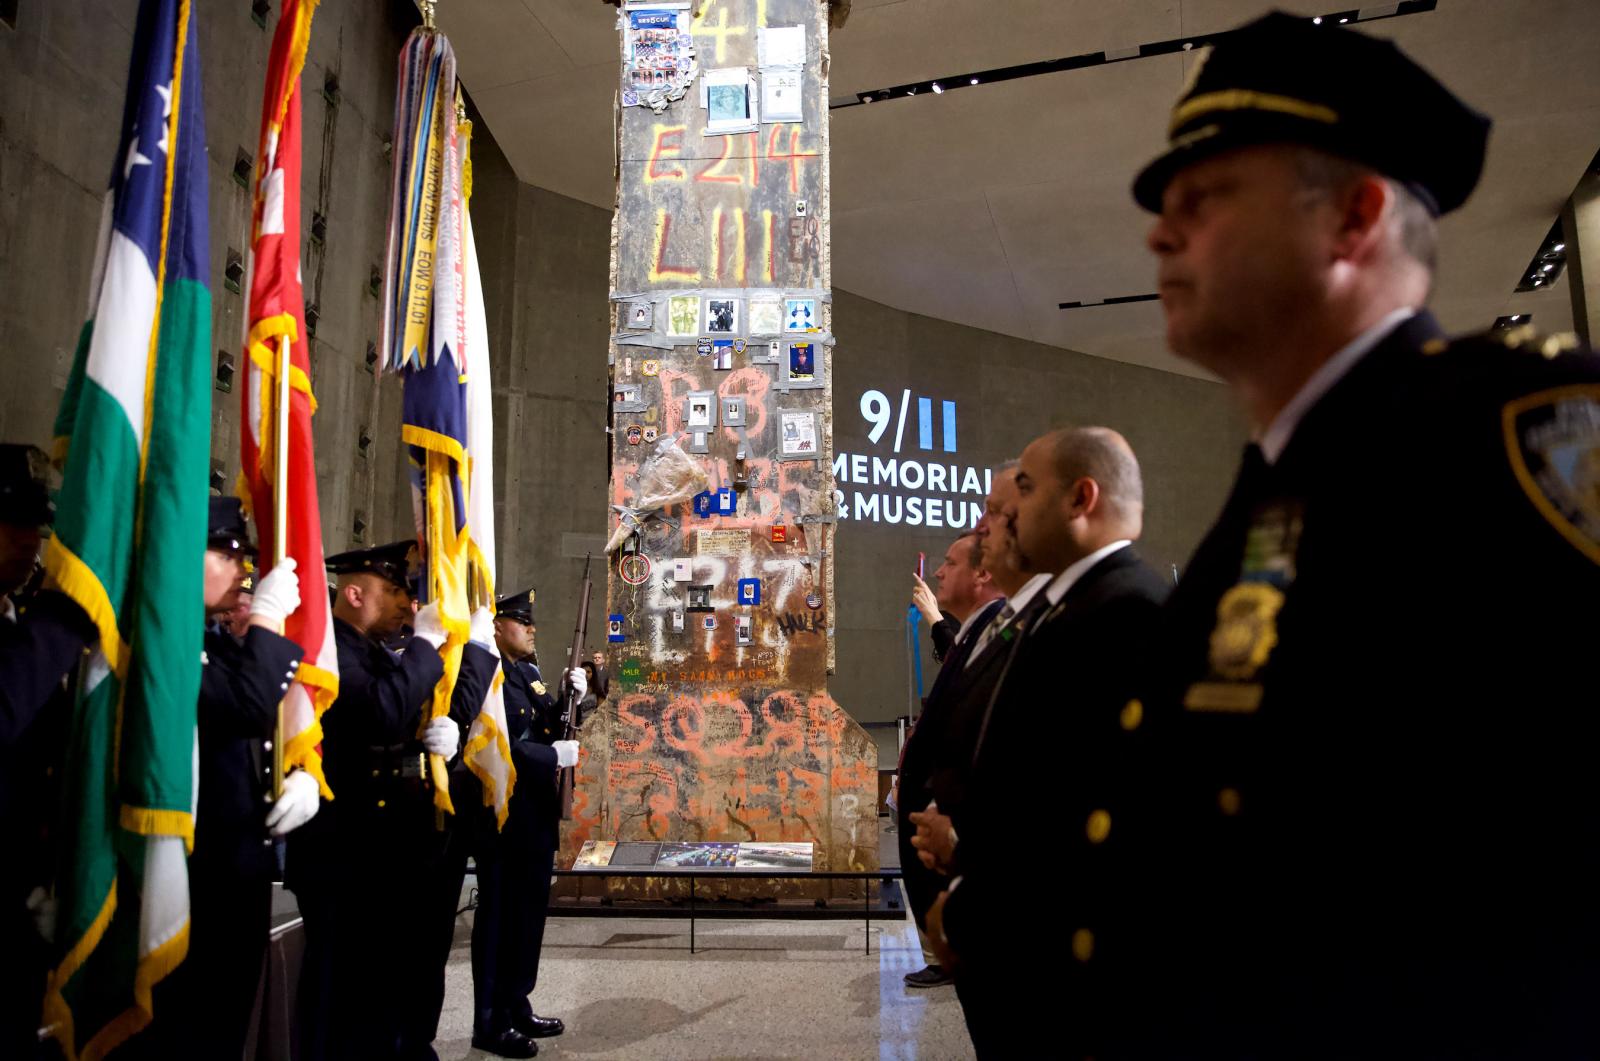 The Last Column towers over NYPD flag bearers standing to the left and men in suits and ties standing to the right. The Last Column, a fixture of Foundation Hall, is covered in photos and written tribute to rescue and recovery workers. 